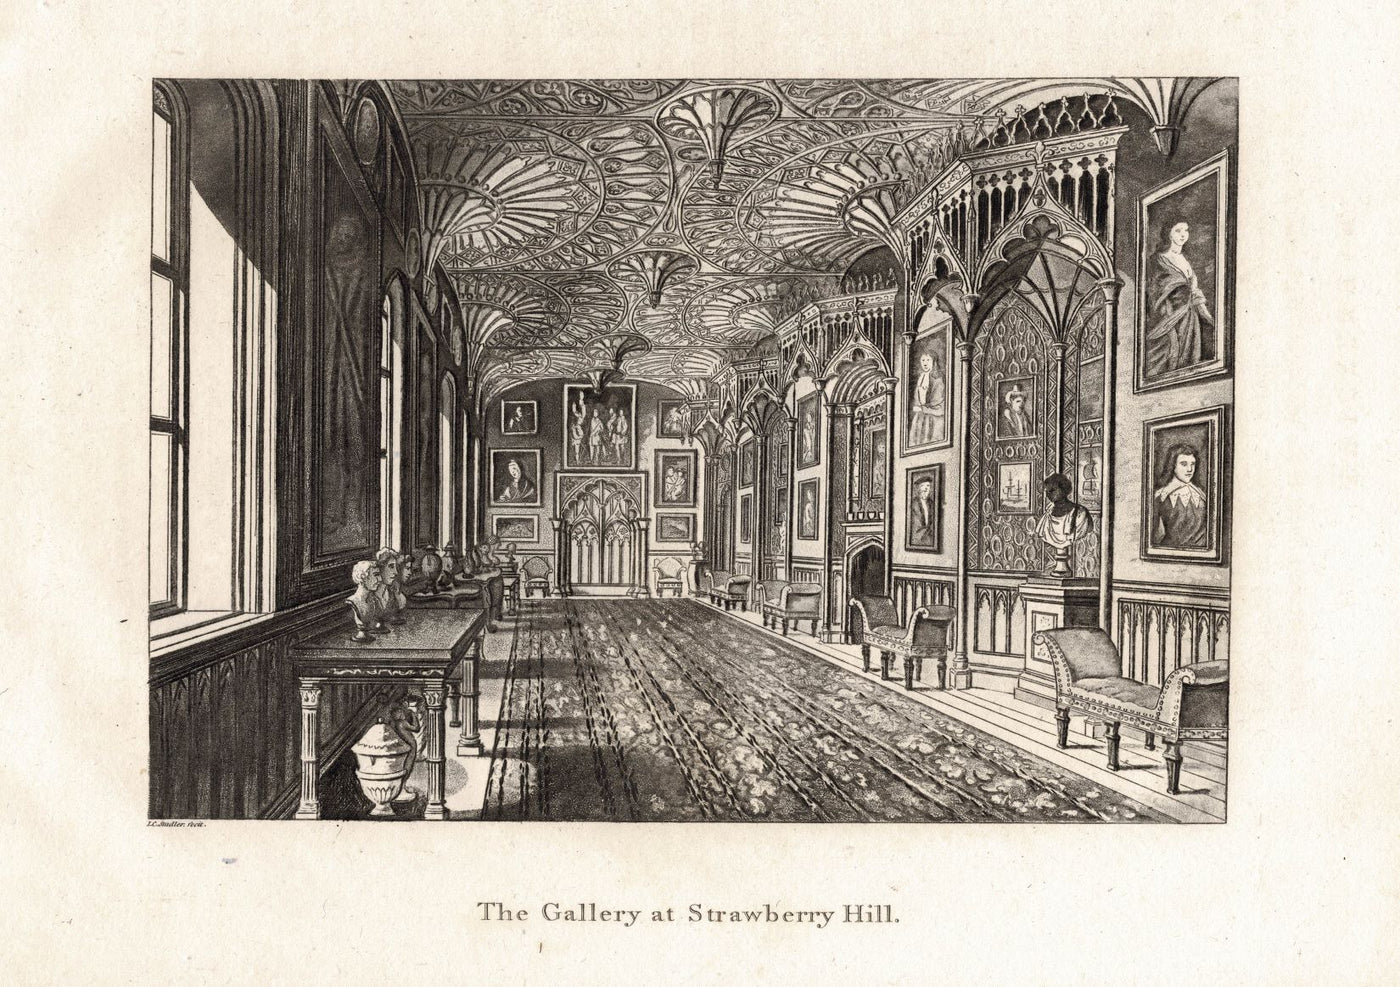 Strawberry Hill Gallery antique print, 1811